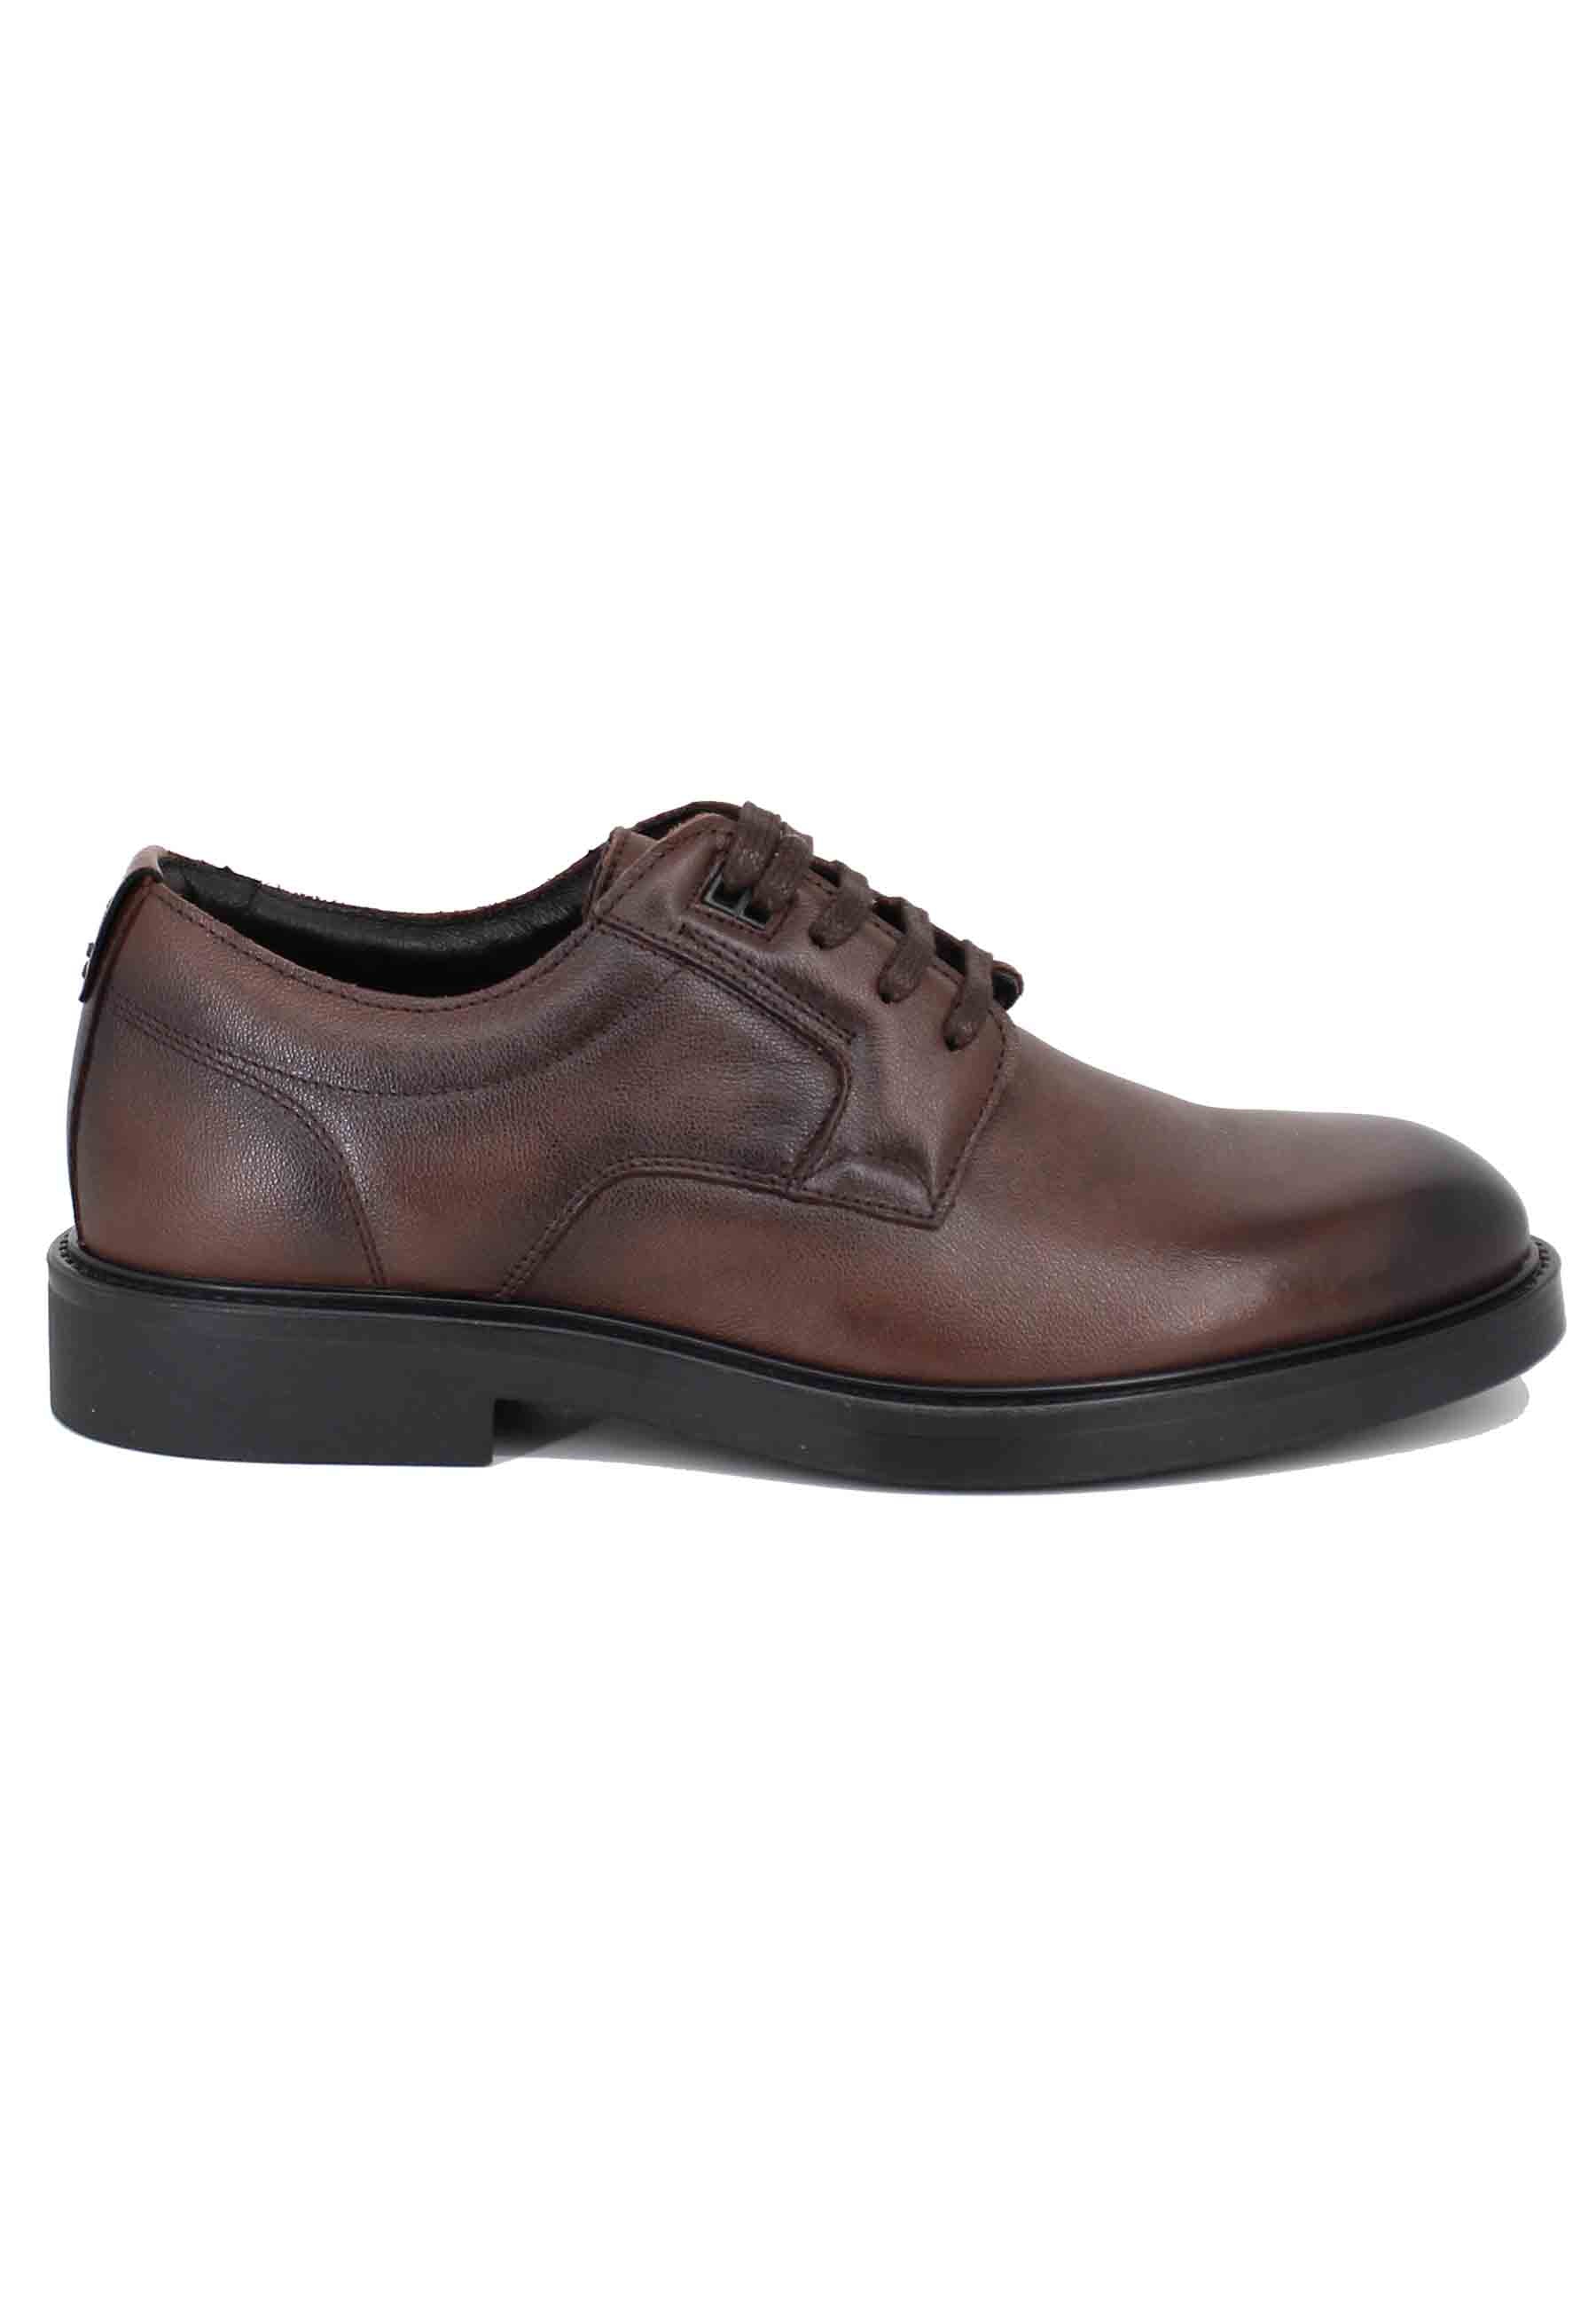 Men's brown leather lace-ups